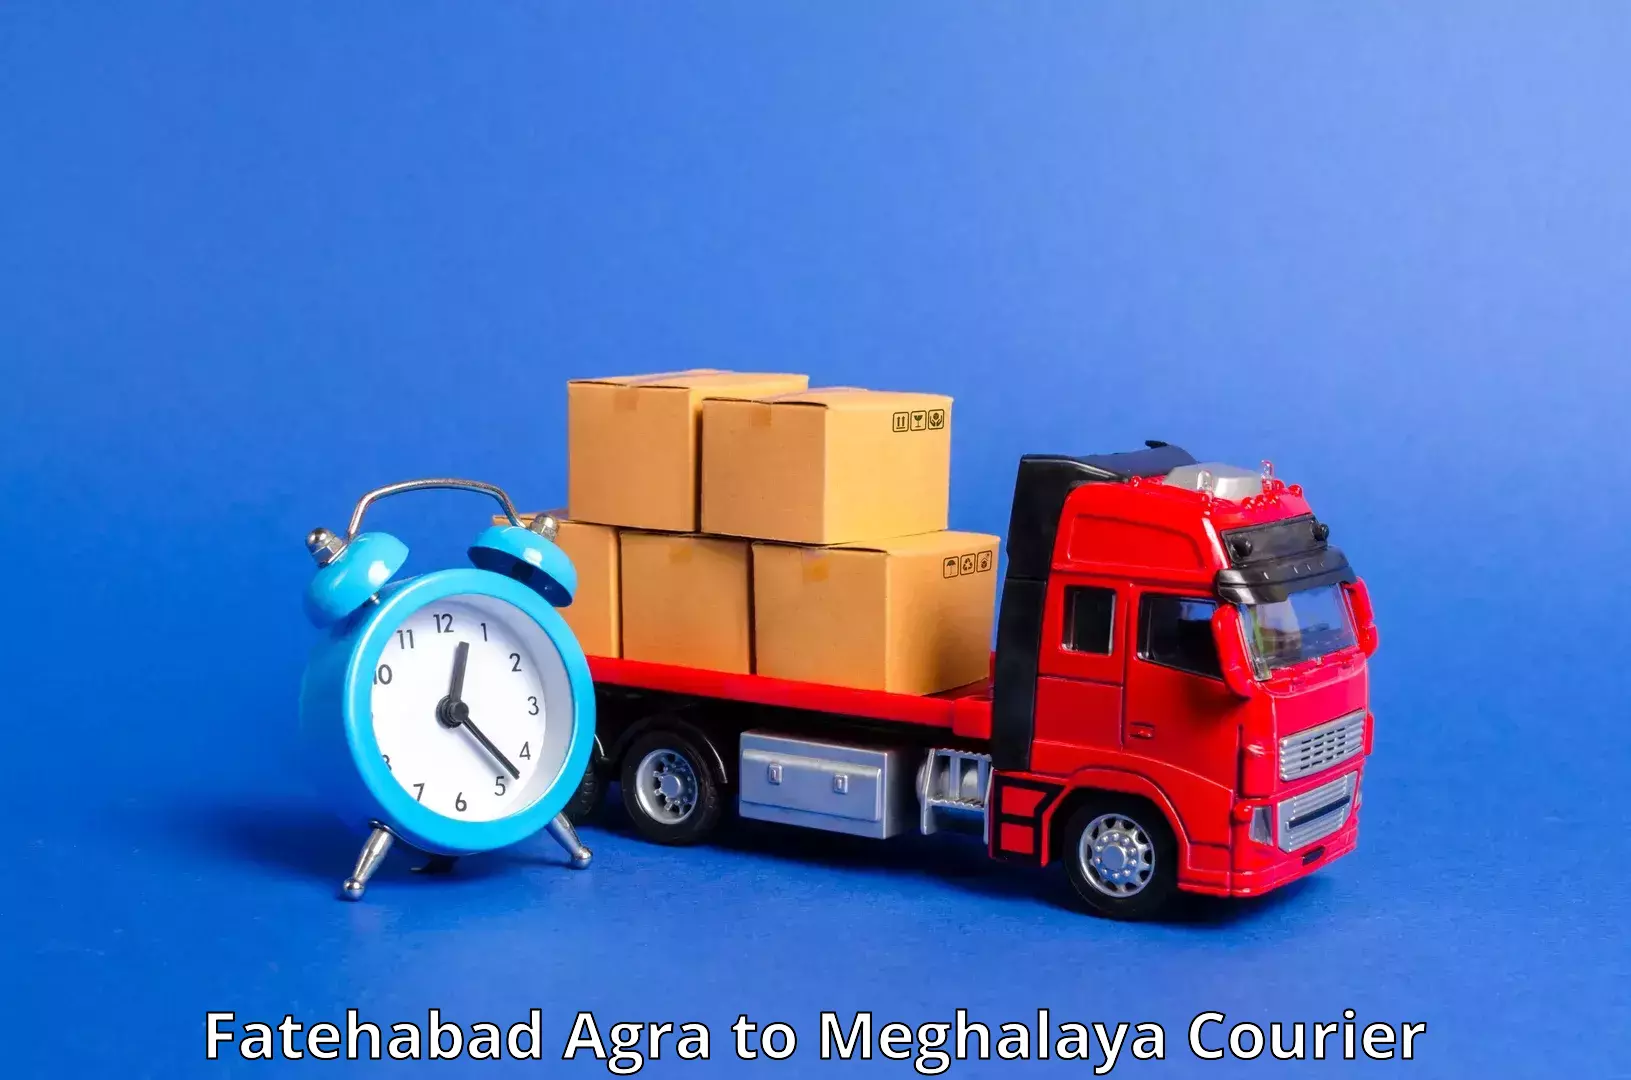 Flexible parcel services Fatehabad Agra to Tura